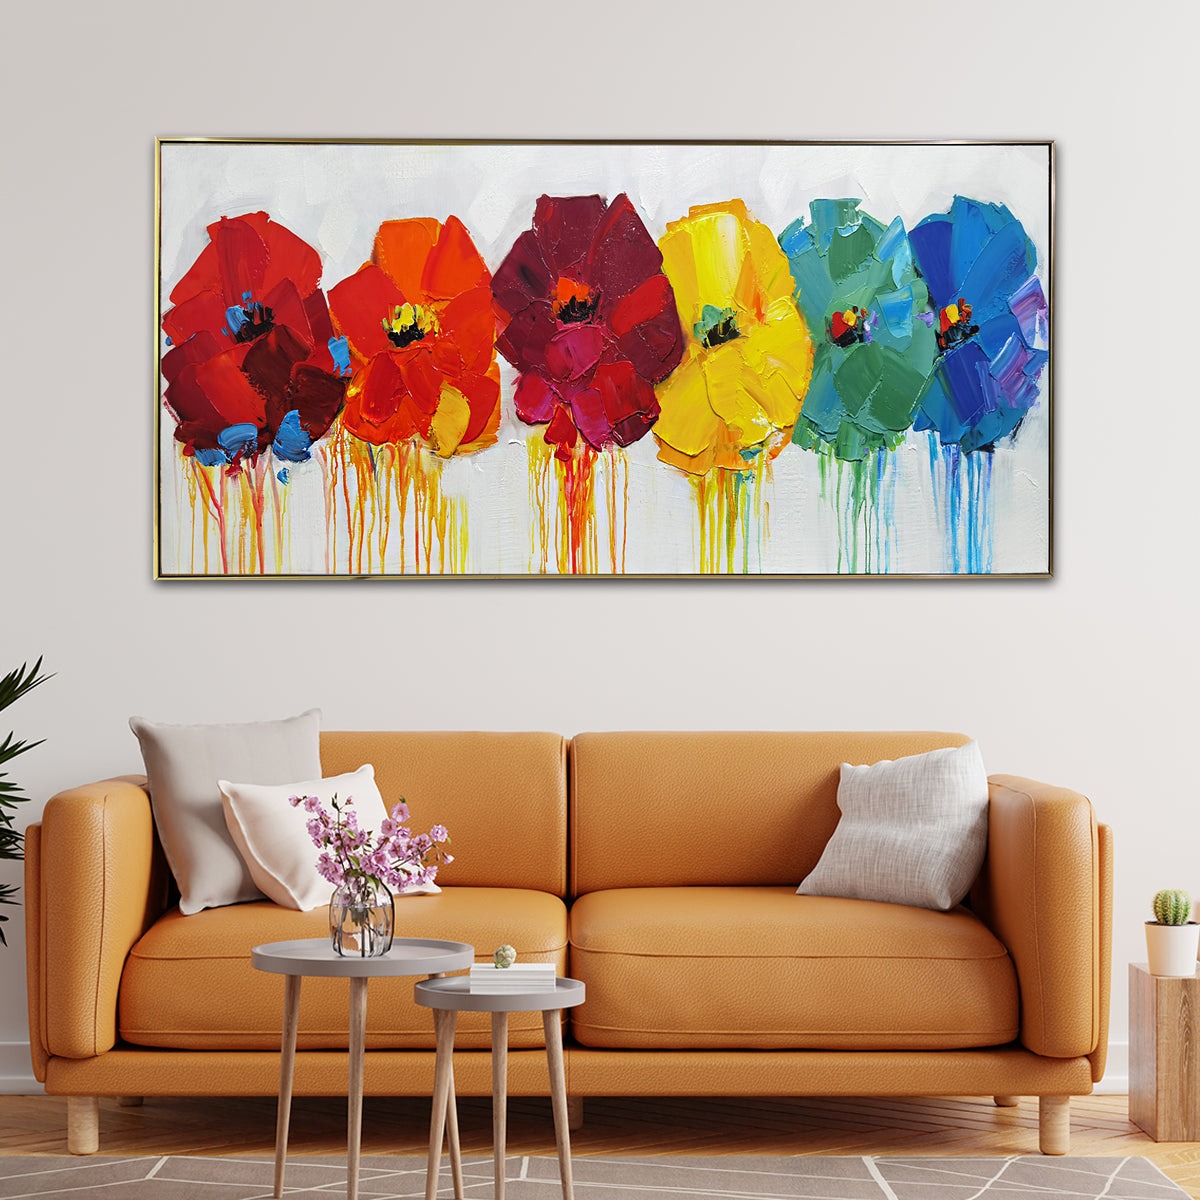 Elevate Your Home Decor with Captivating Abstract Paintings: A Festive Showcase